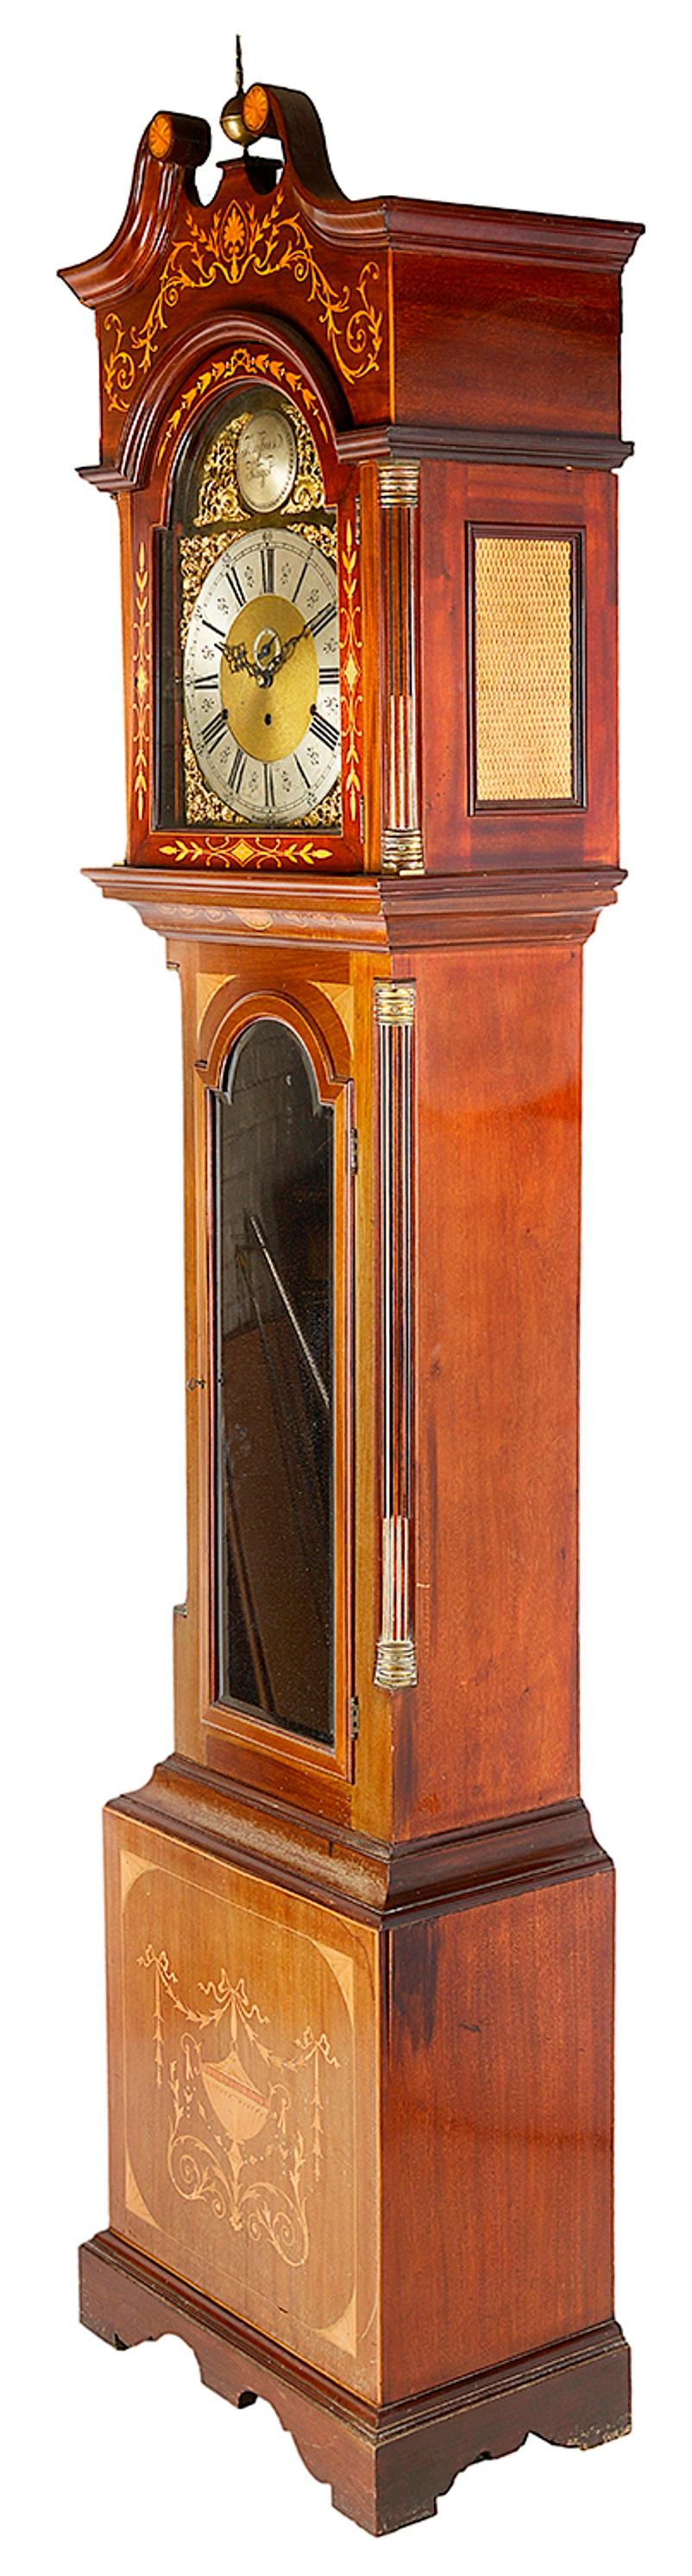 A very impressive late 19th-early 20th century Sheraton Revival mahogany musical grandfather clock, having marquetry inlaid to the hood and case of scrolling foliate and motif decoration. The three train brass faced arch dial with a strike, silent